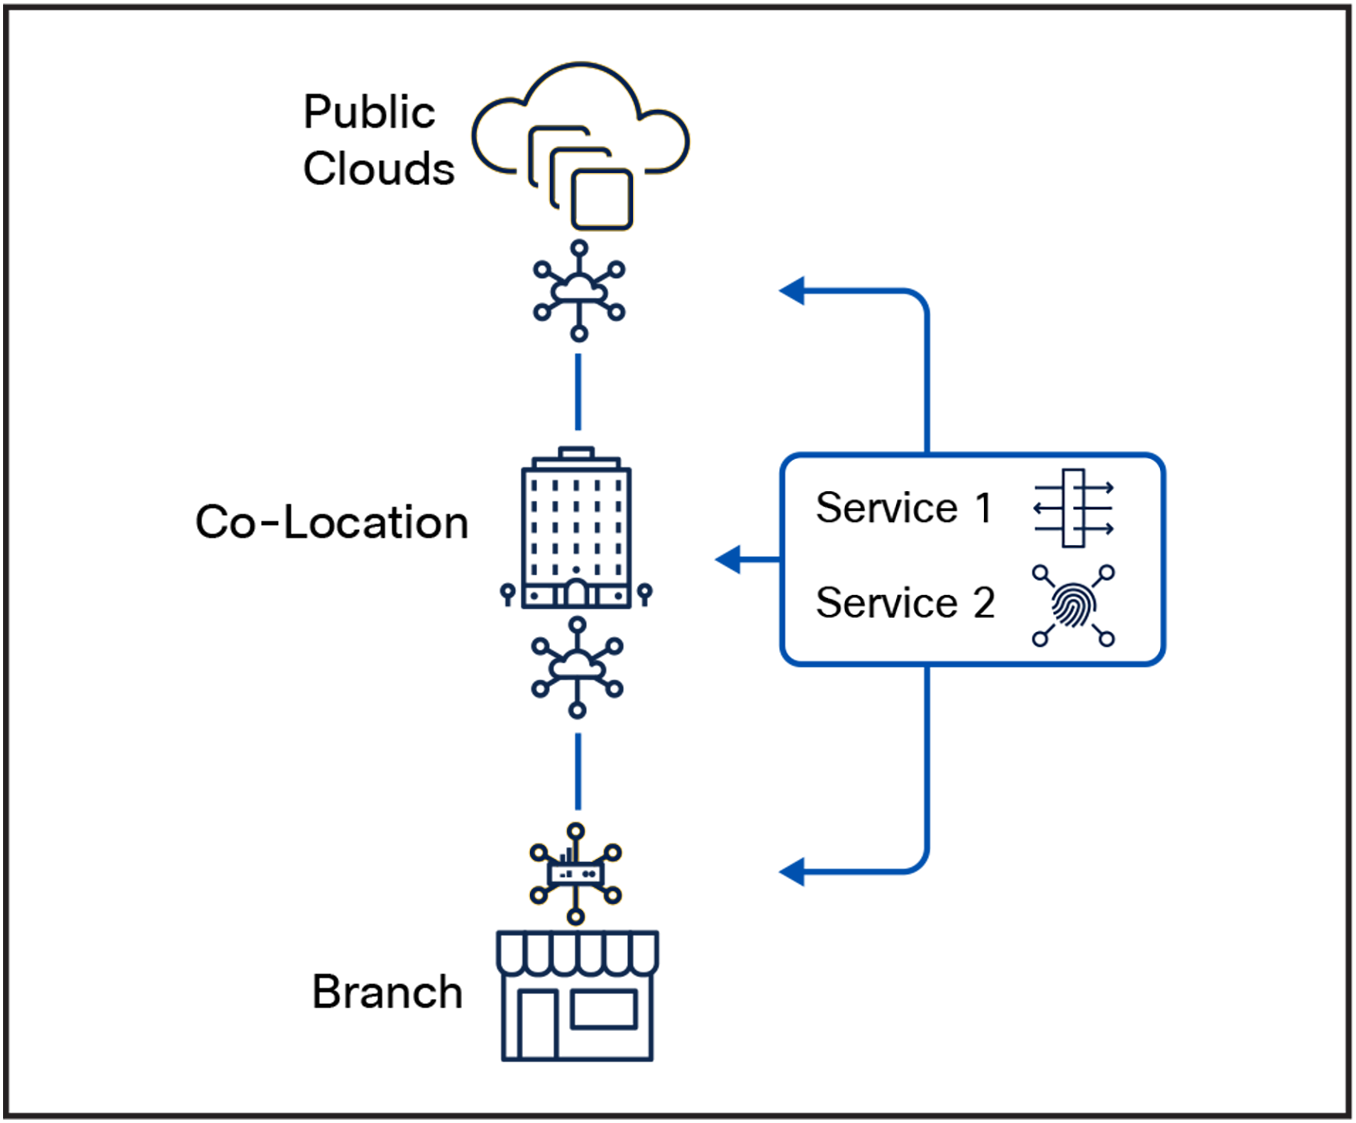 Automate and deploy service chains anywhere in SD-WAN fabric